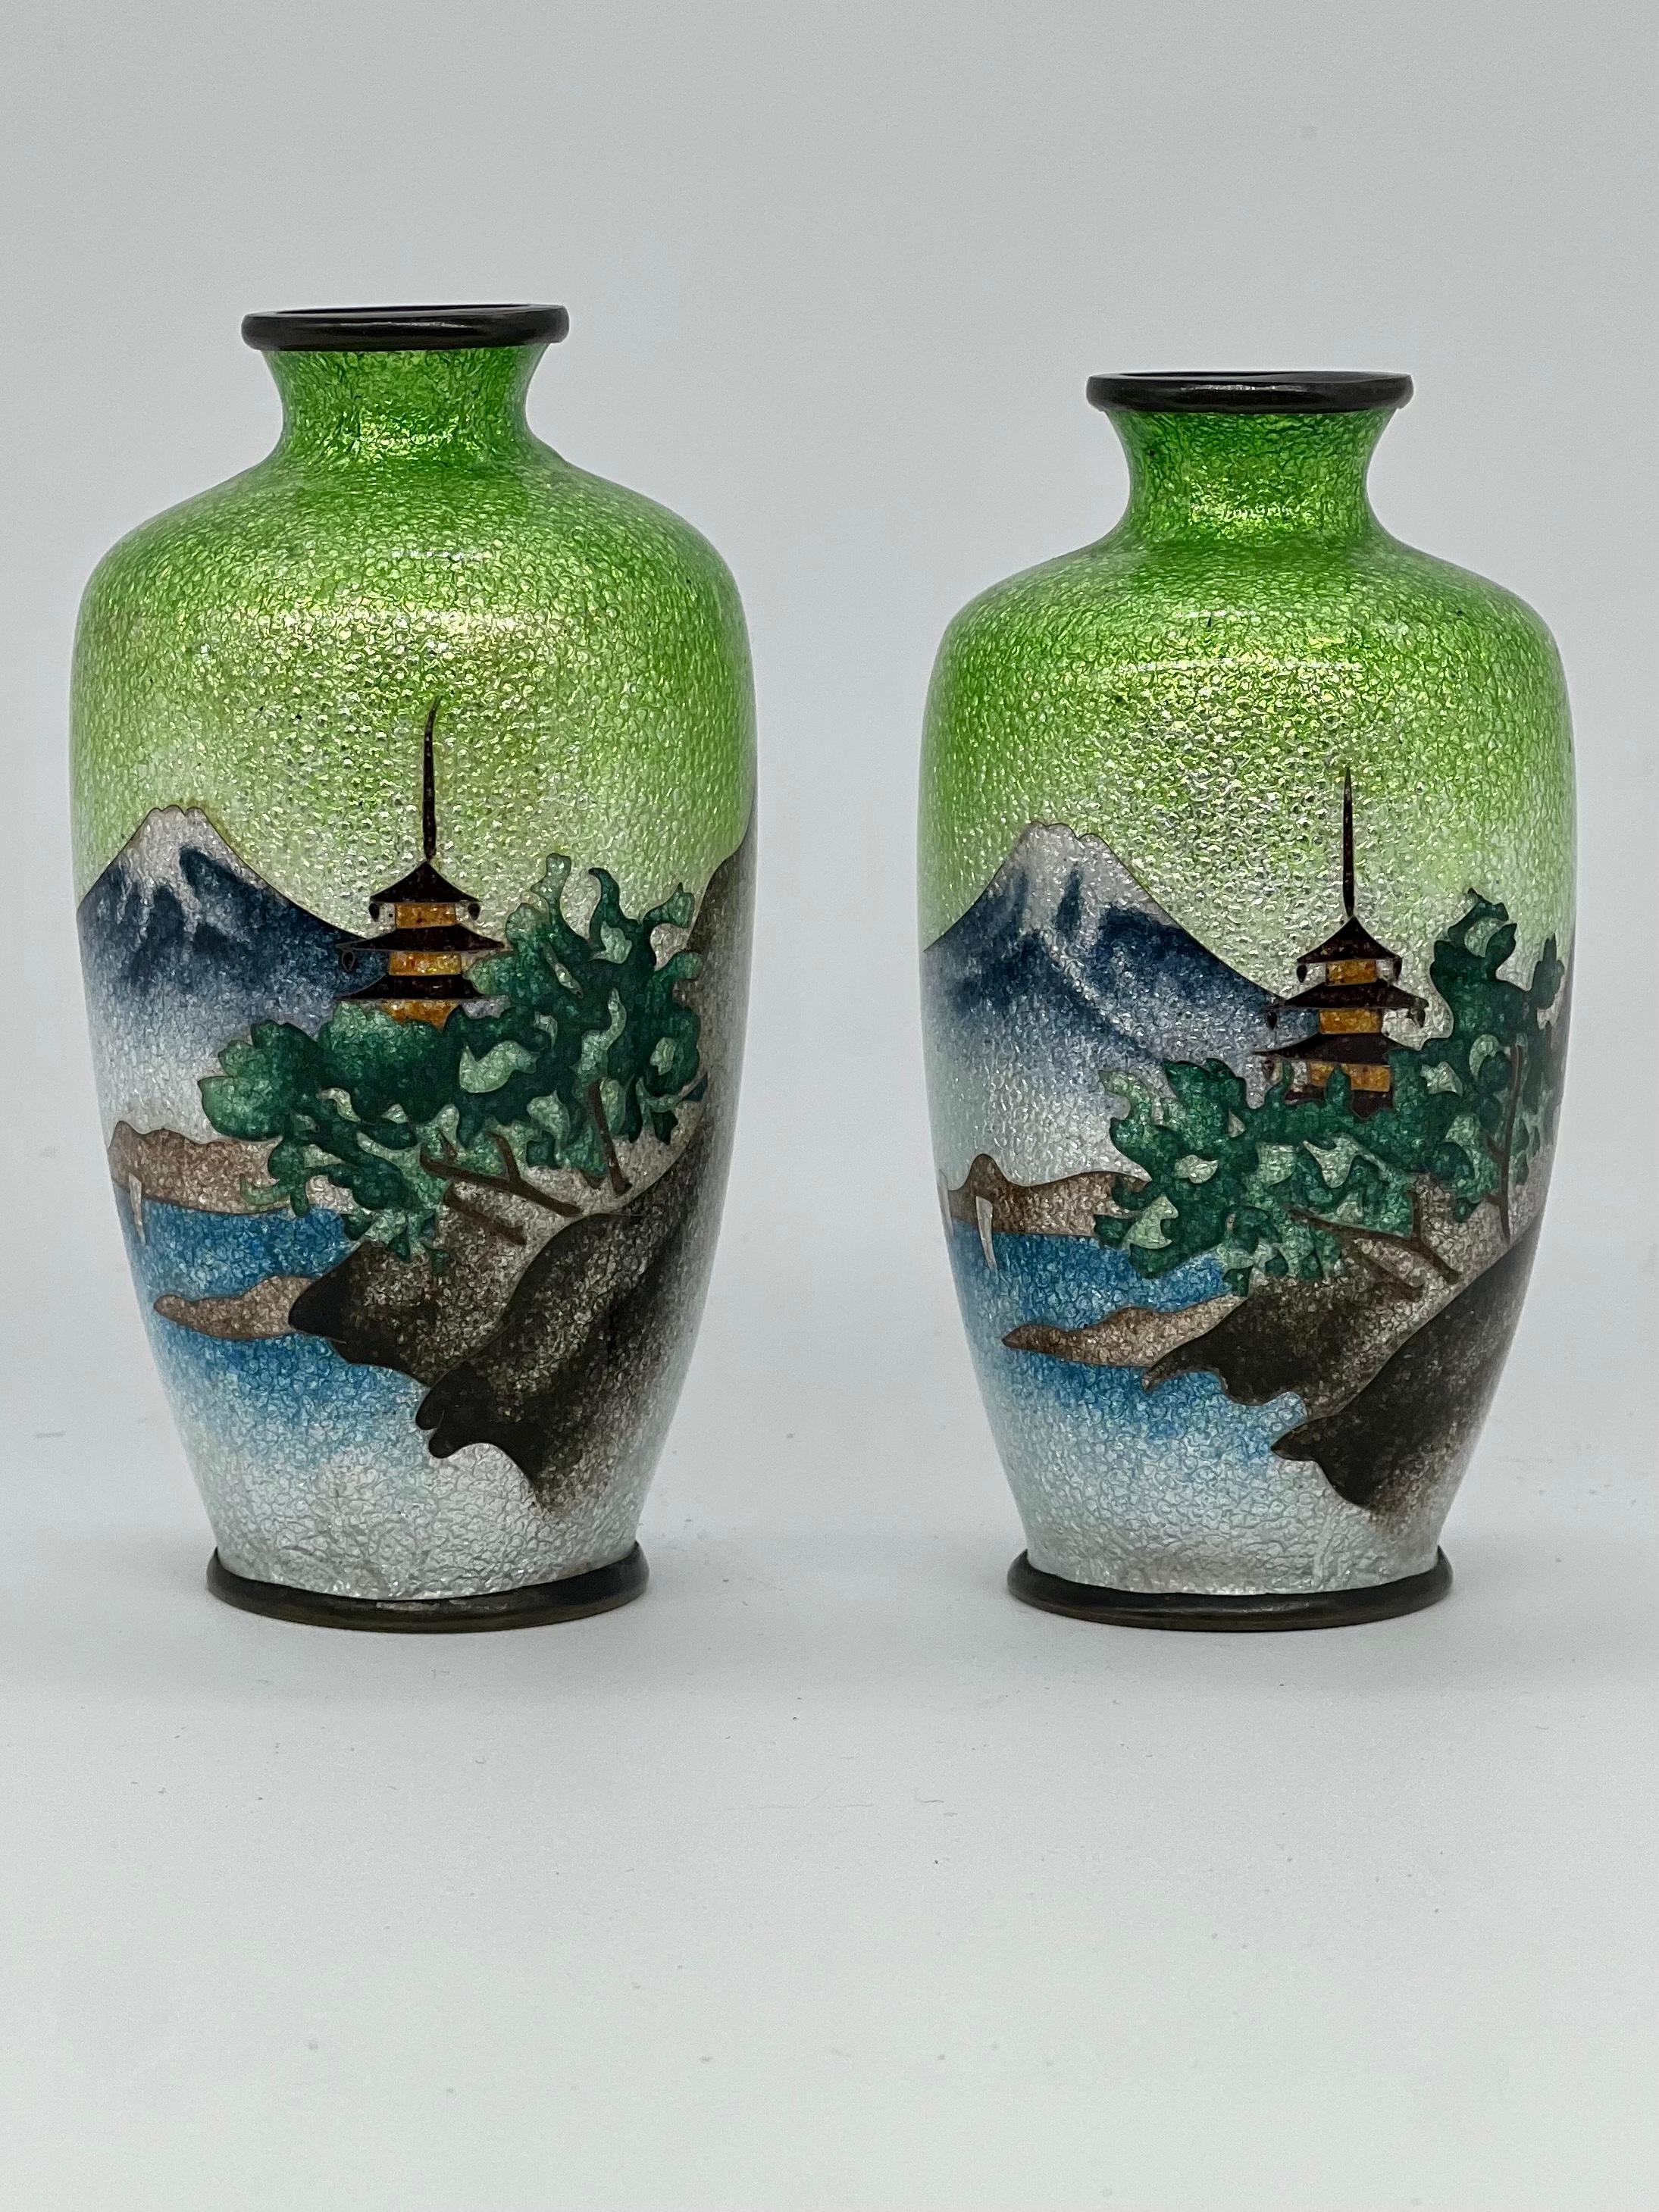 Lovely Pair of Antique Meiji Period Japanese Ginbari Cloisonne Vases, 19th C In Good Condition For Sale In London, GB